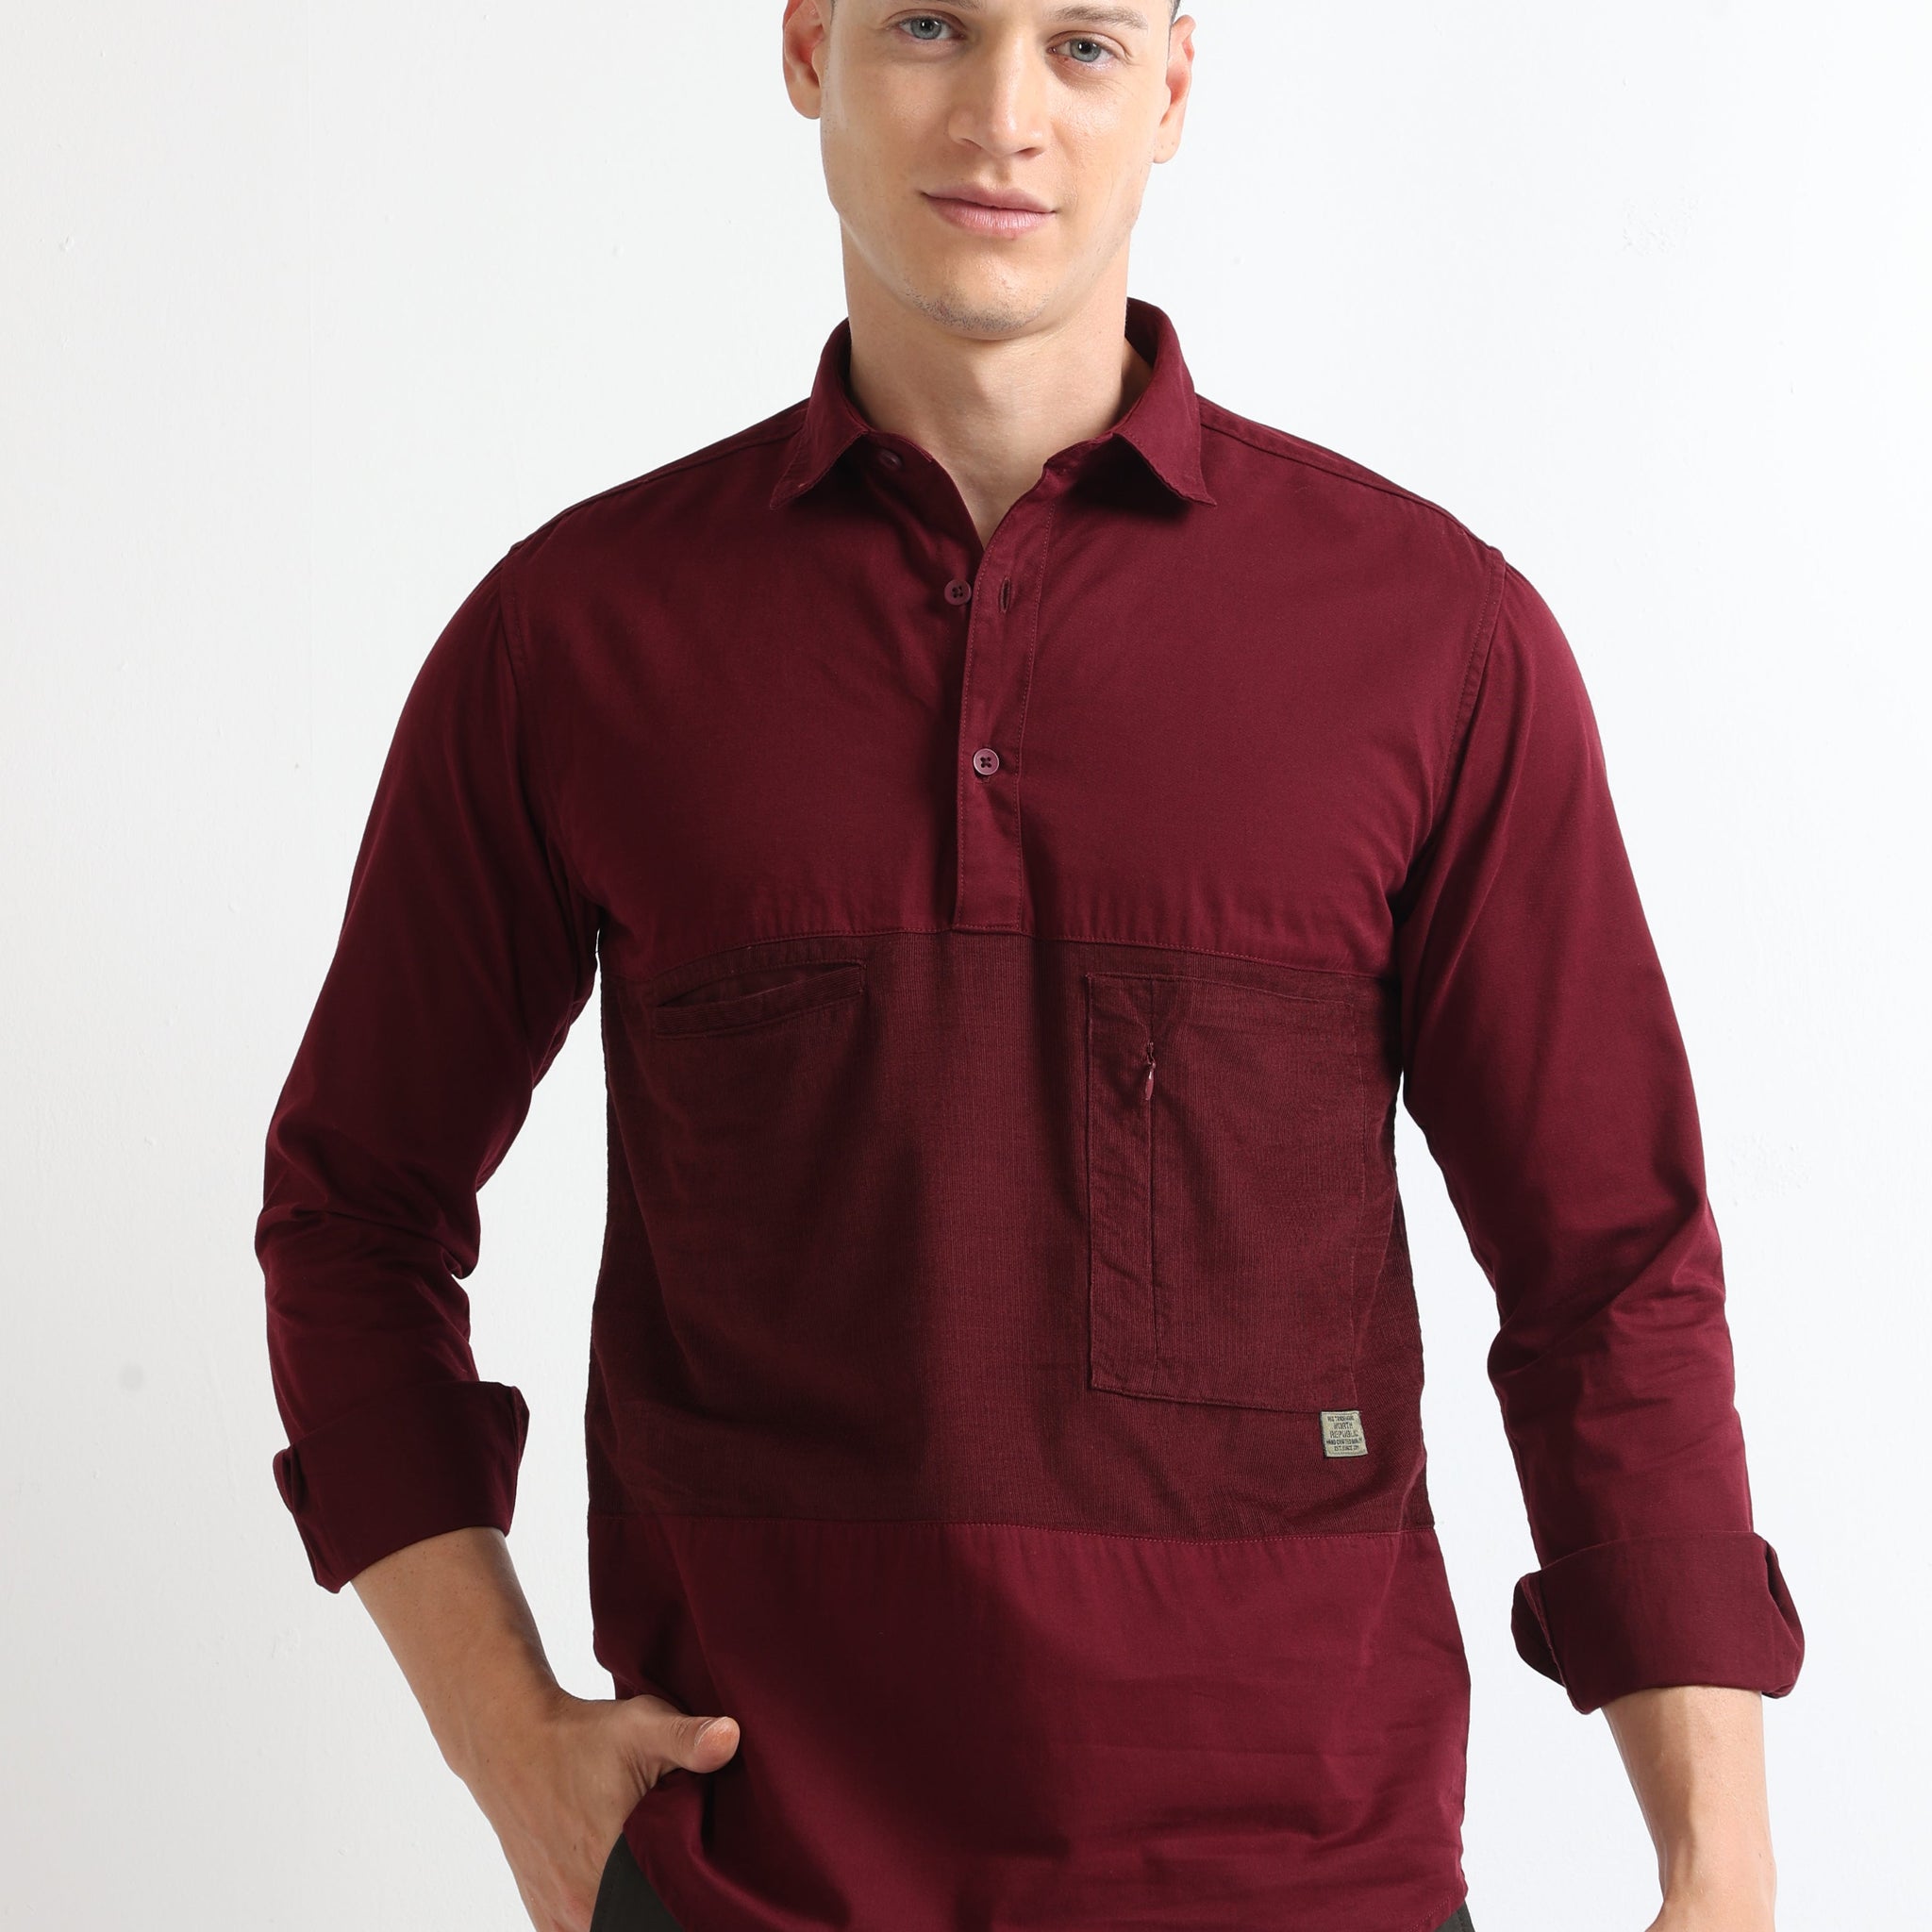 Buy Grunt Self Color Cut And Sew Stylish Open Collar Shirt Online